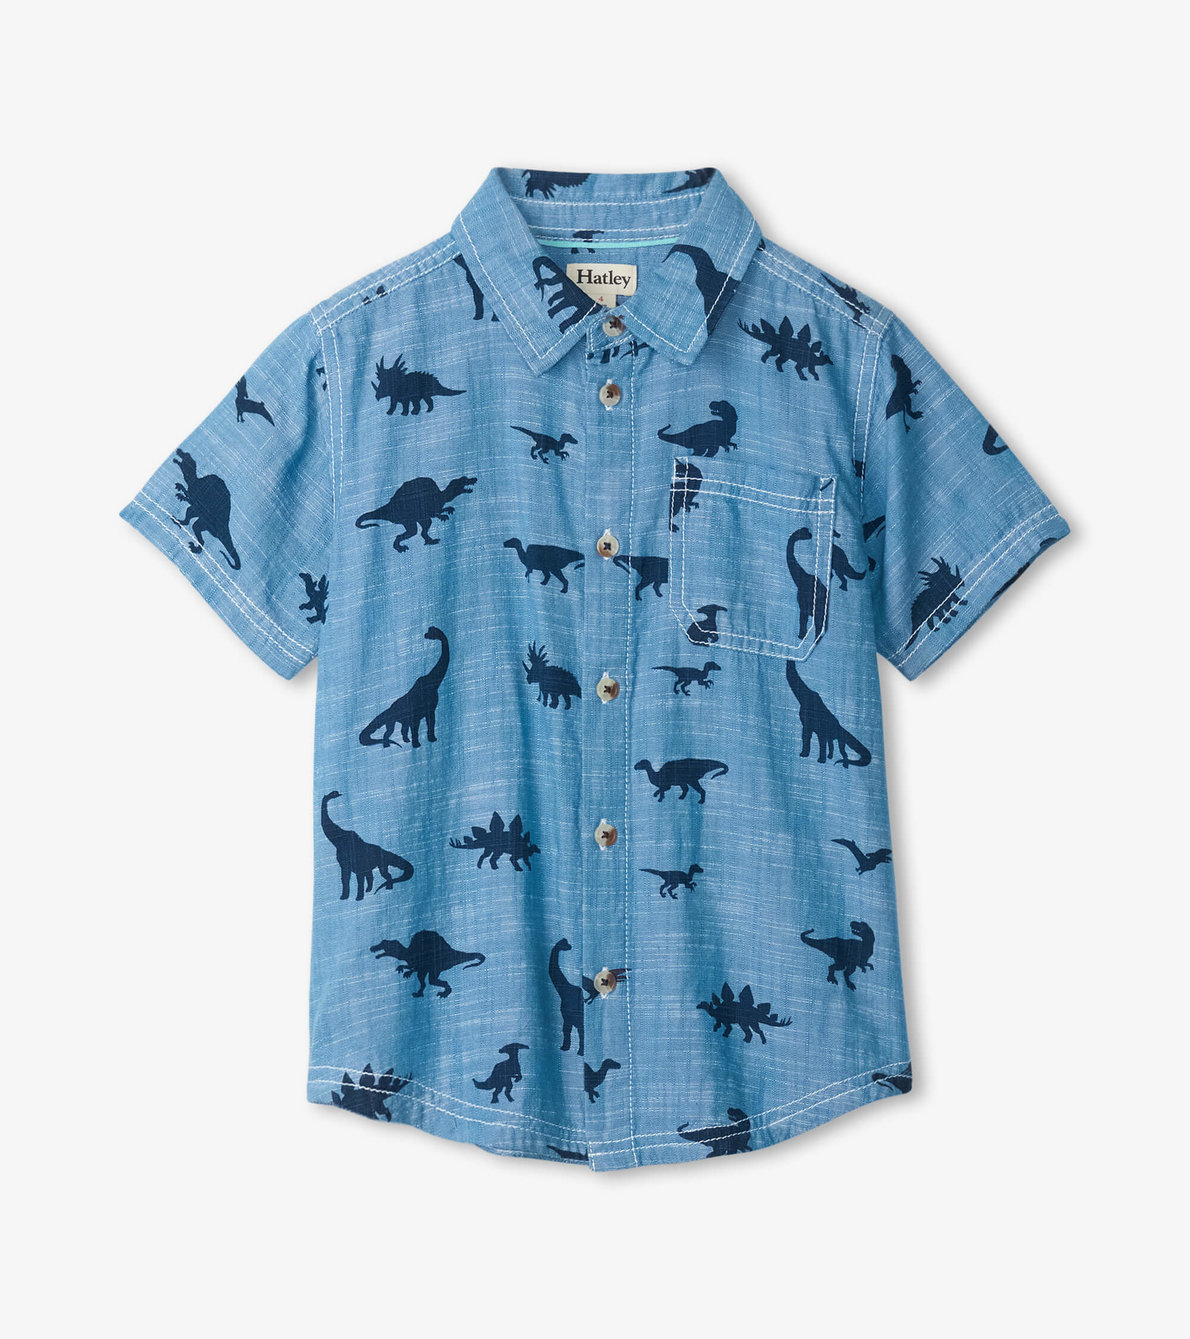 View larger image of Dino Silhouettes Short Sleeve Button Down Shirt